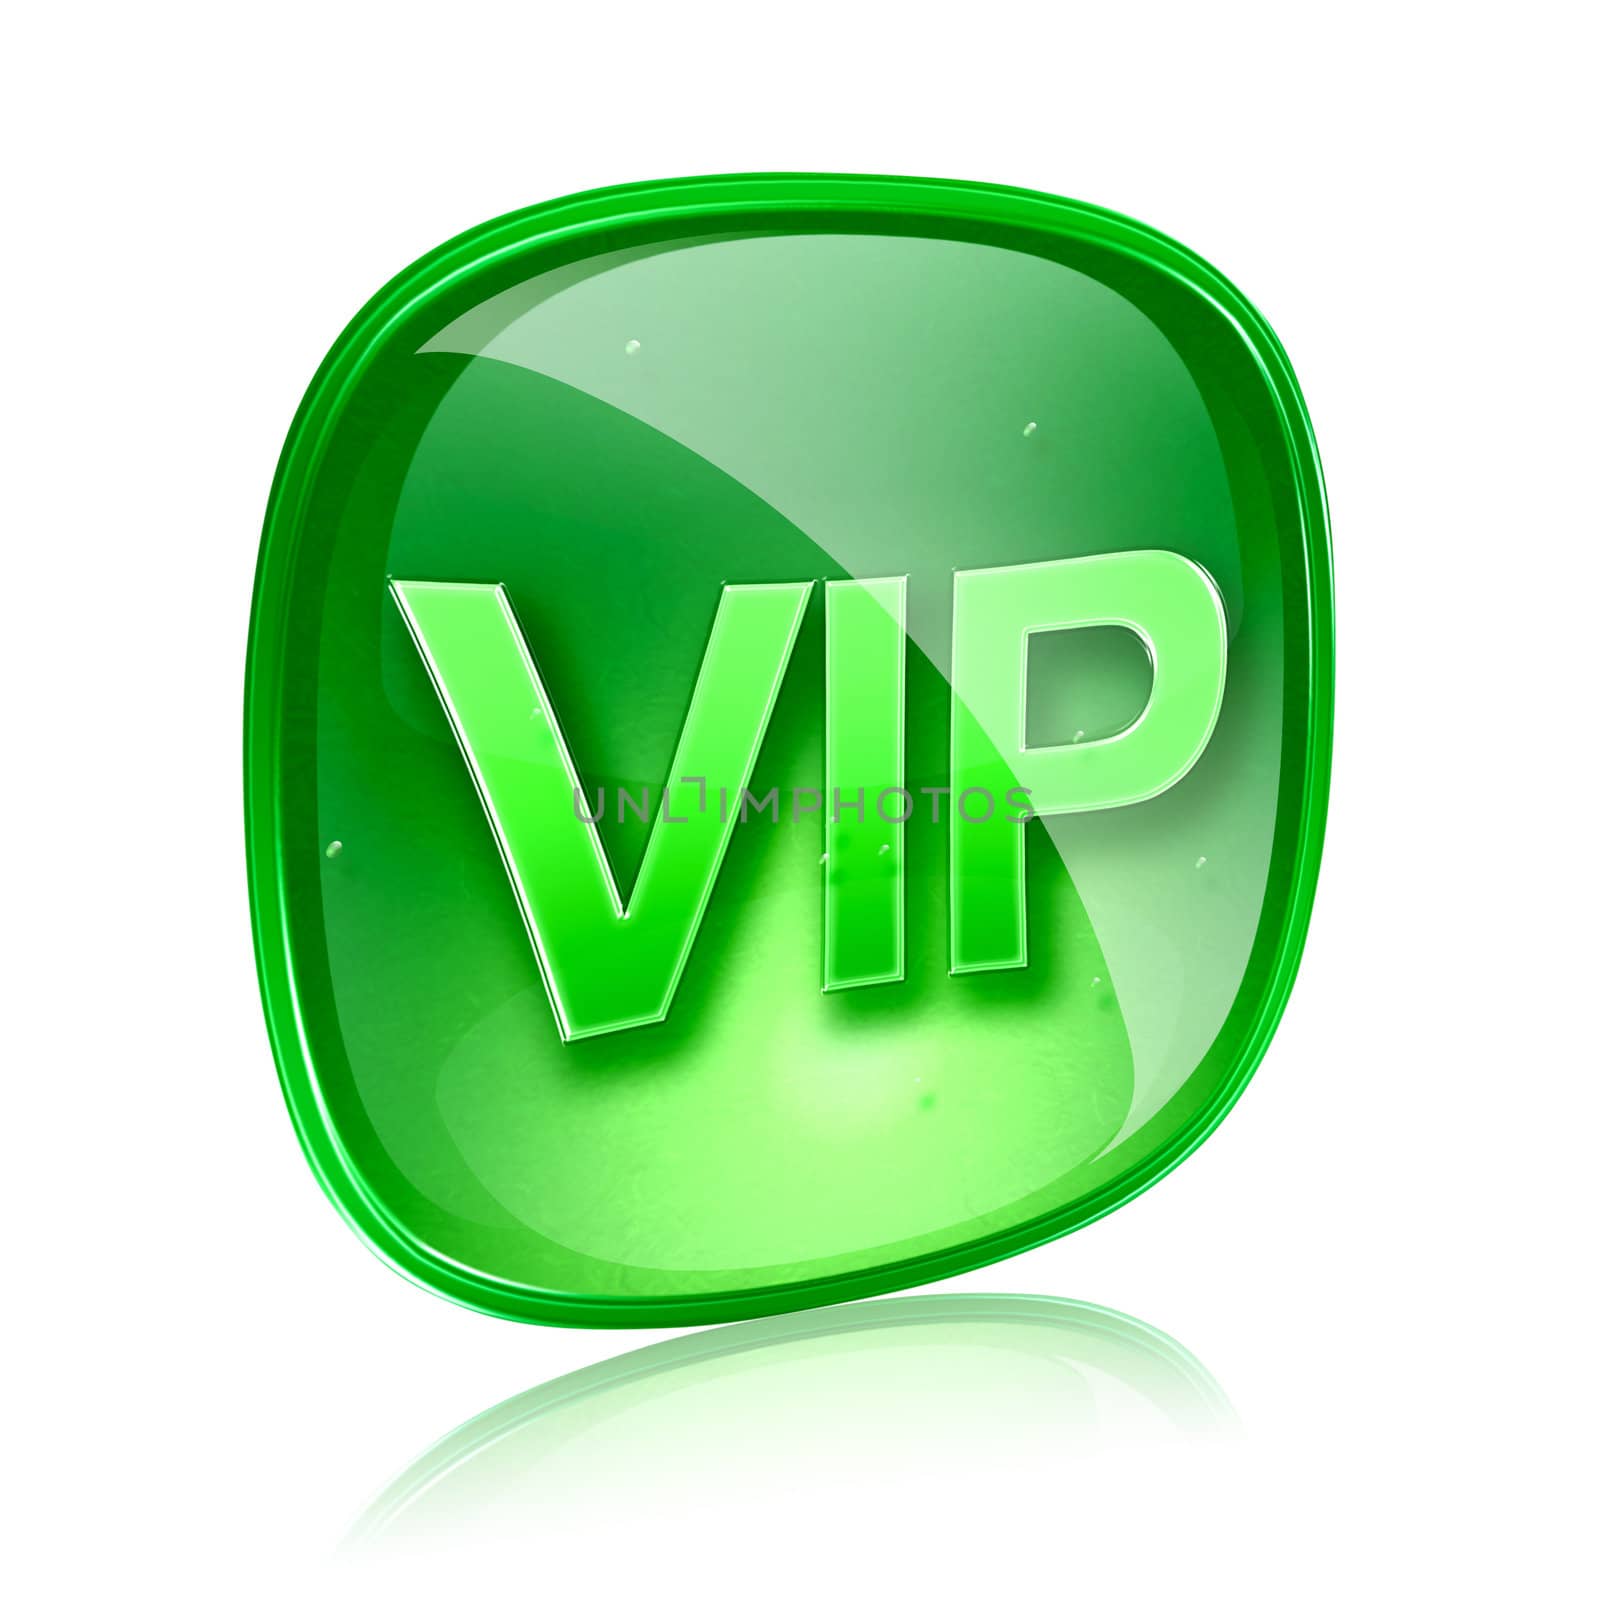 VIP icon green glass, isolated on white background.